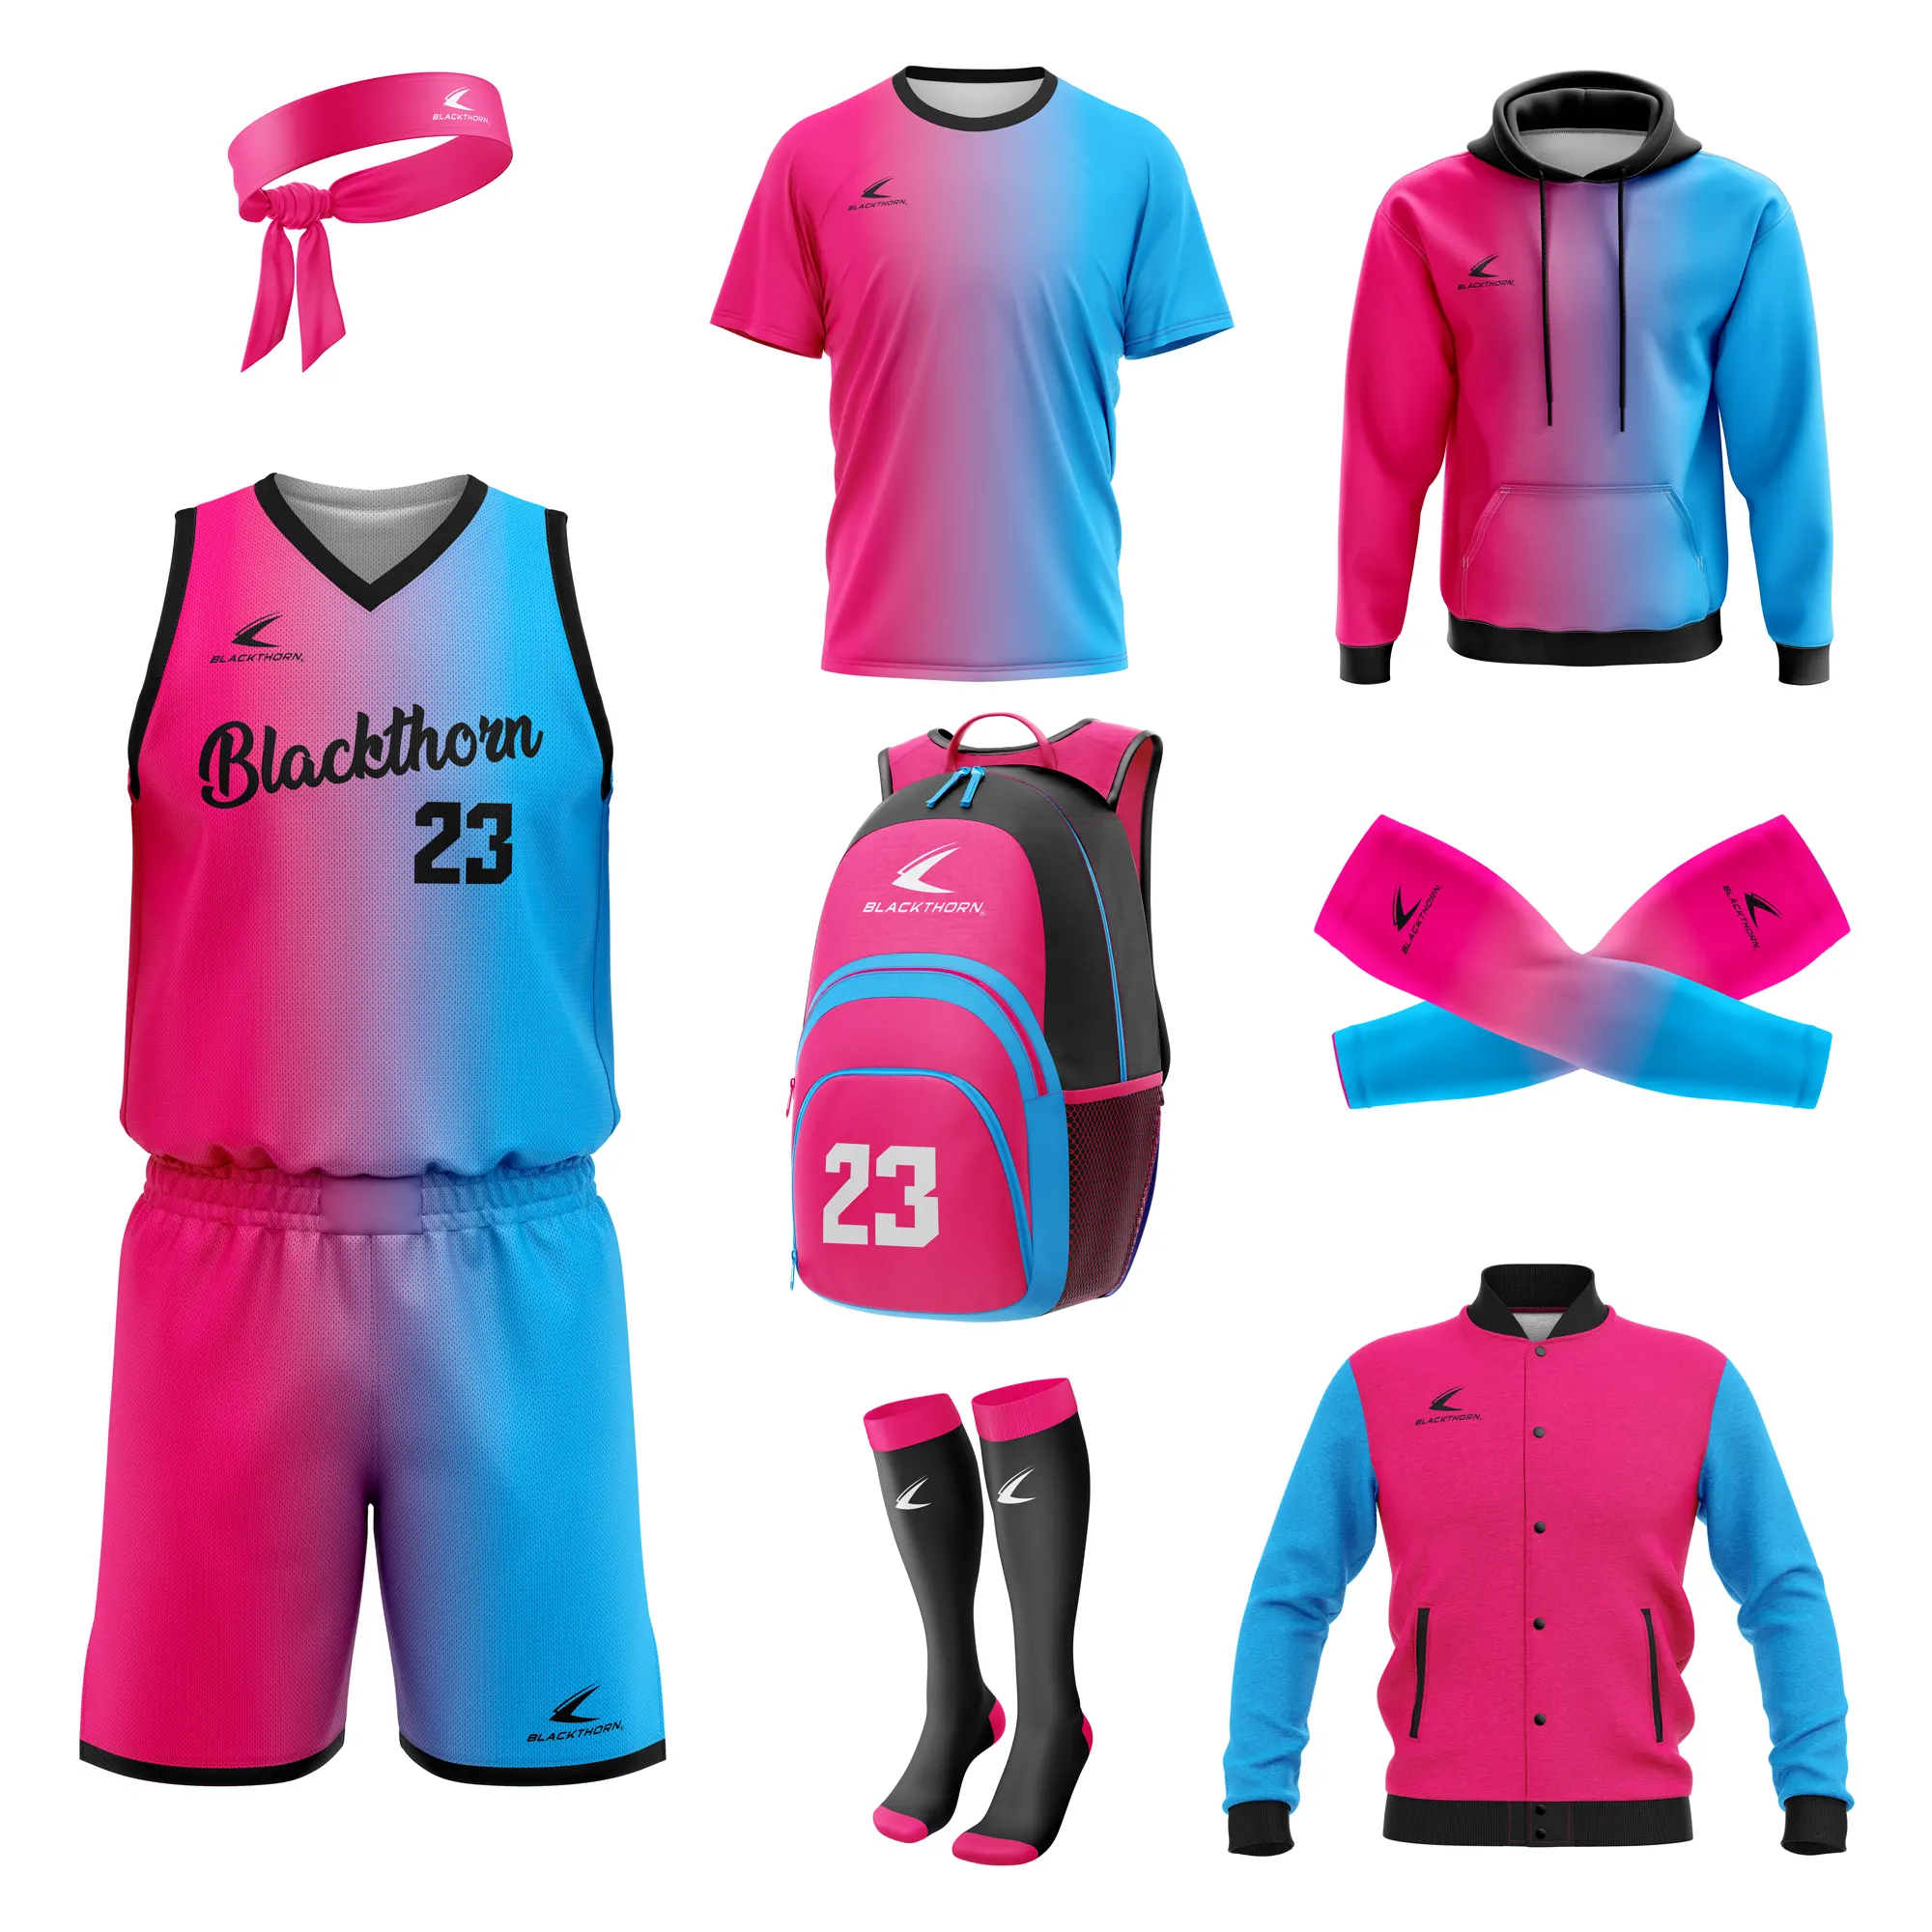 Adults Youth Polyester / Spandex Full Sublimation basketball wear / basketball uniforms jersey shorts backpack